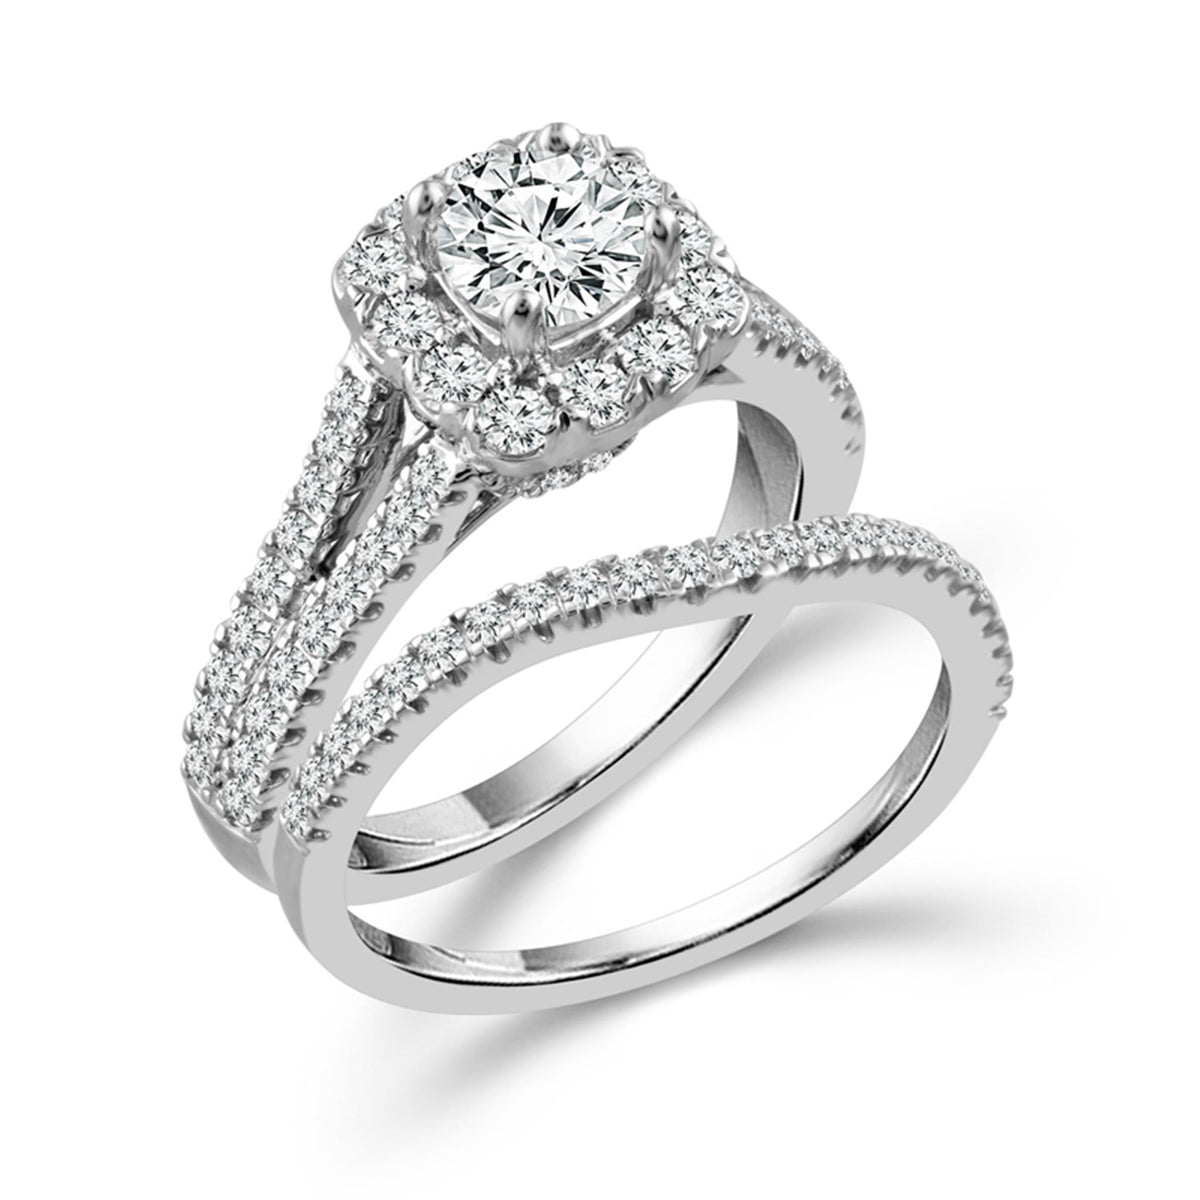 14Kt White Gold Halo Engagement And Wedding Ring Set With 0.70ct Natural Diamond